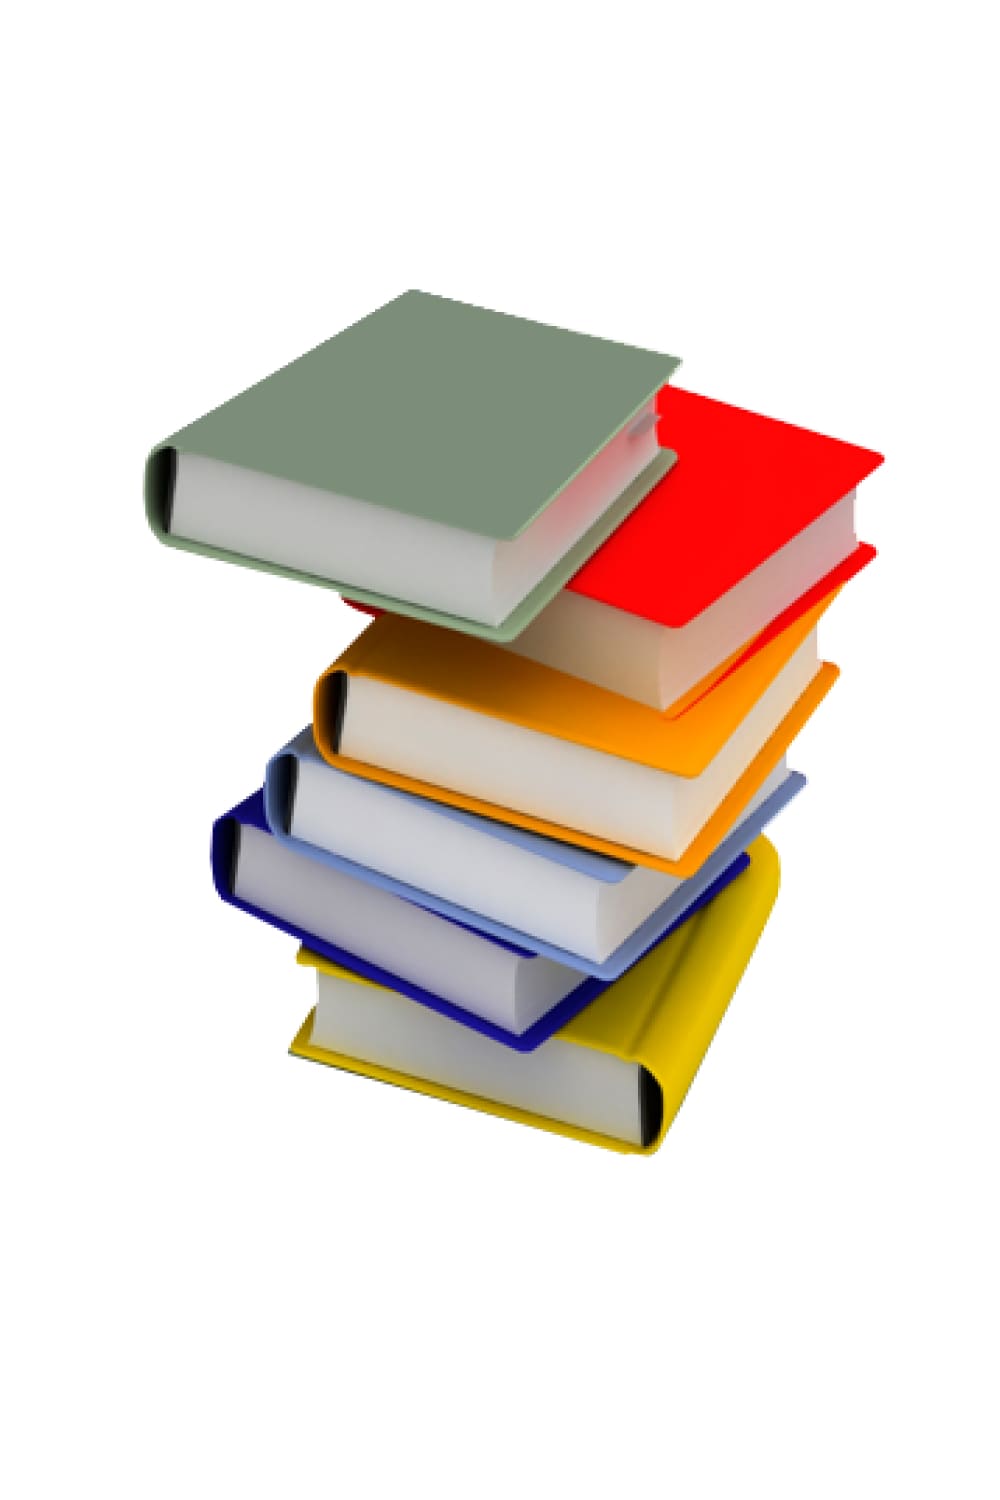 Stack of books with covers in different colors.